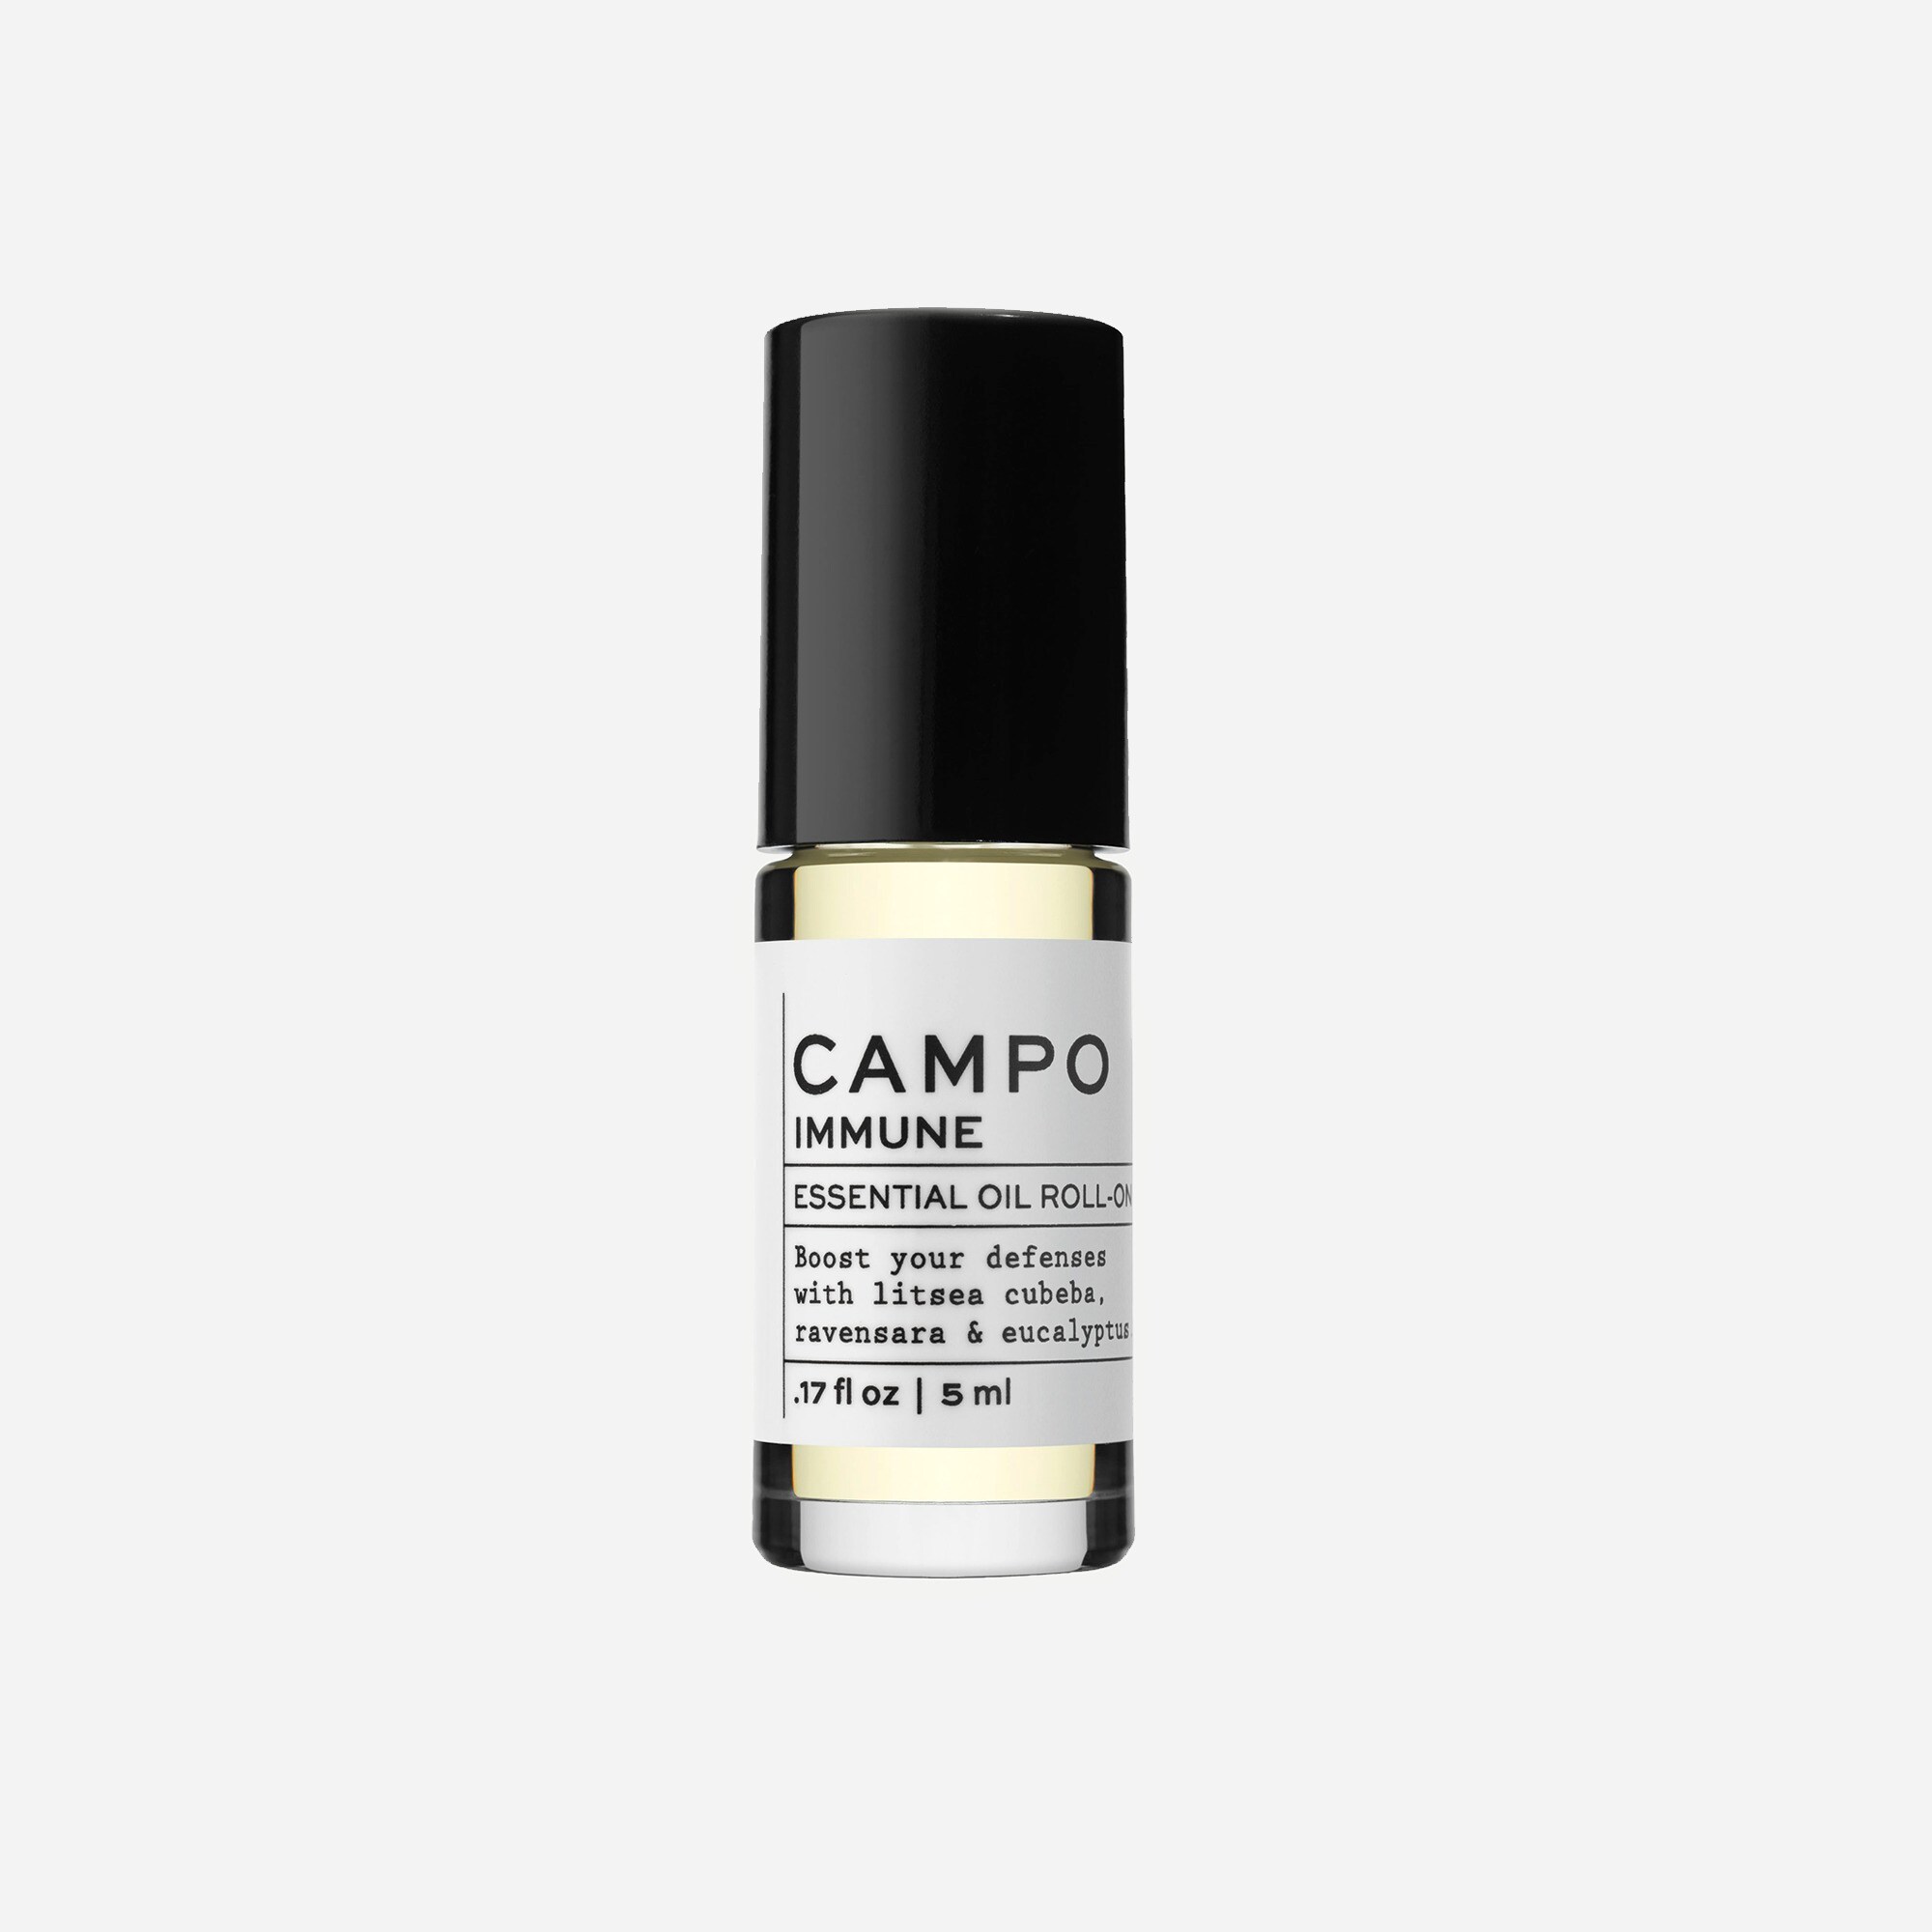  CAMPO® IMMUNE roll-on oil